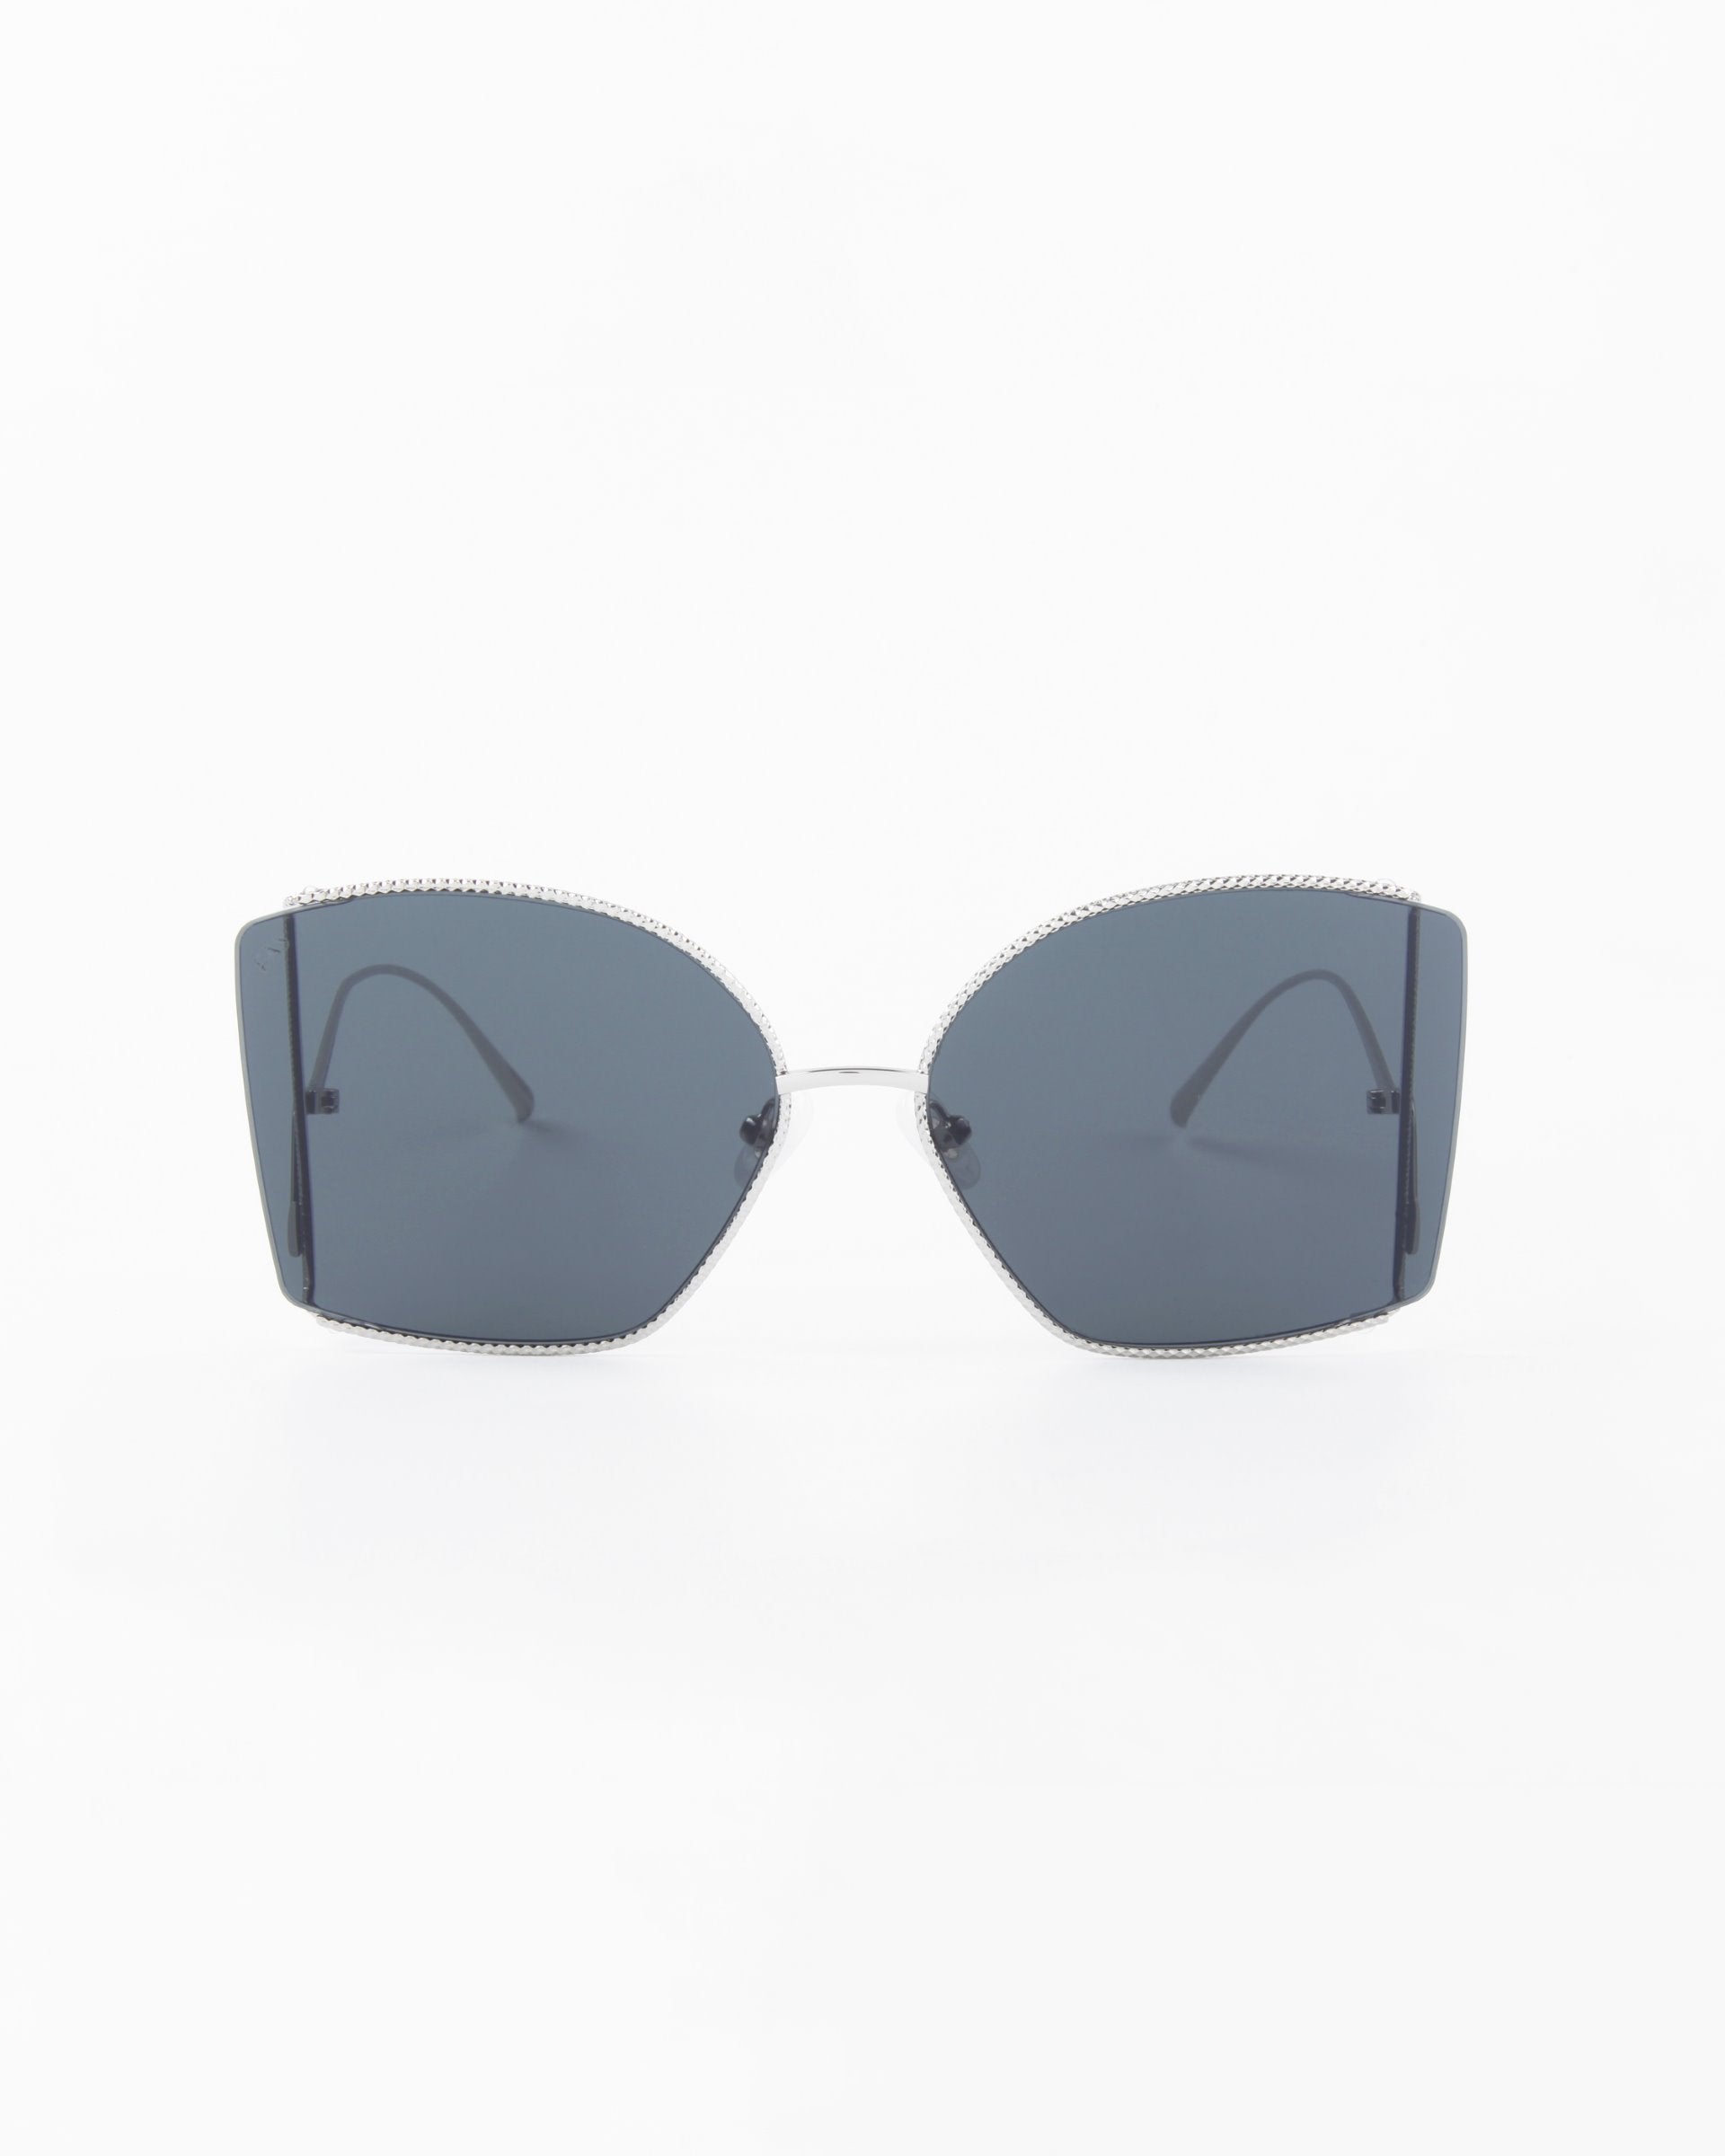 A pair of Dixie sunglasses by For Art's Sake® with large, angular, dark lenses and thin, handmade gold-plated frames. The design is simple yet stylish, with a modern minimalist appearance. The background is plain white, emphasizing the sleek design of the Dixie sunglasses.